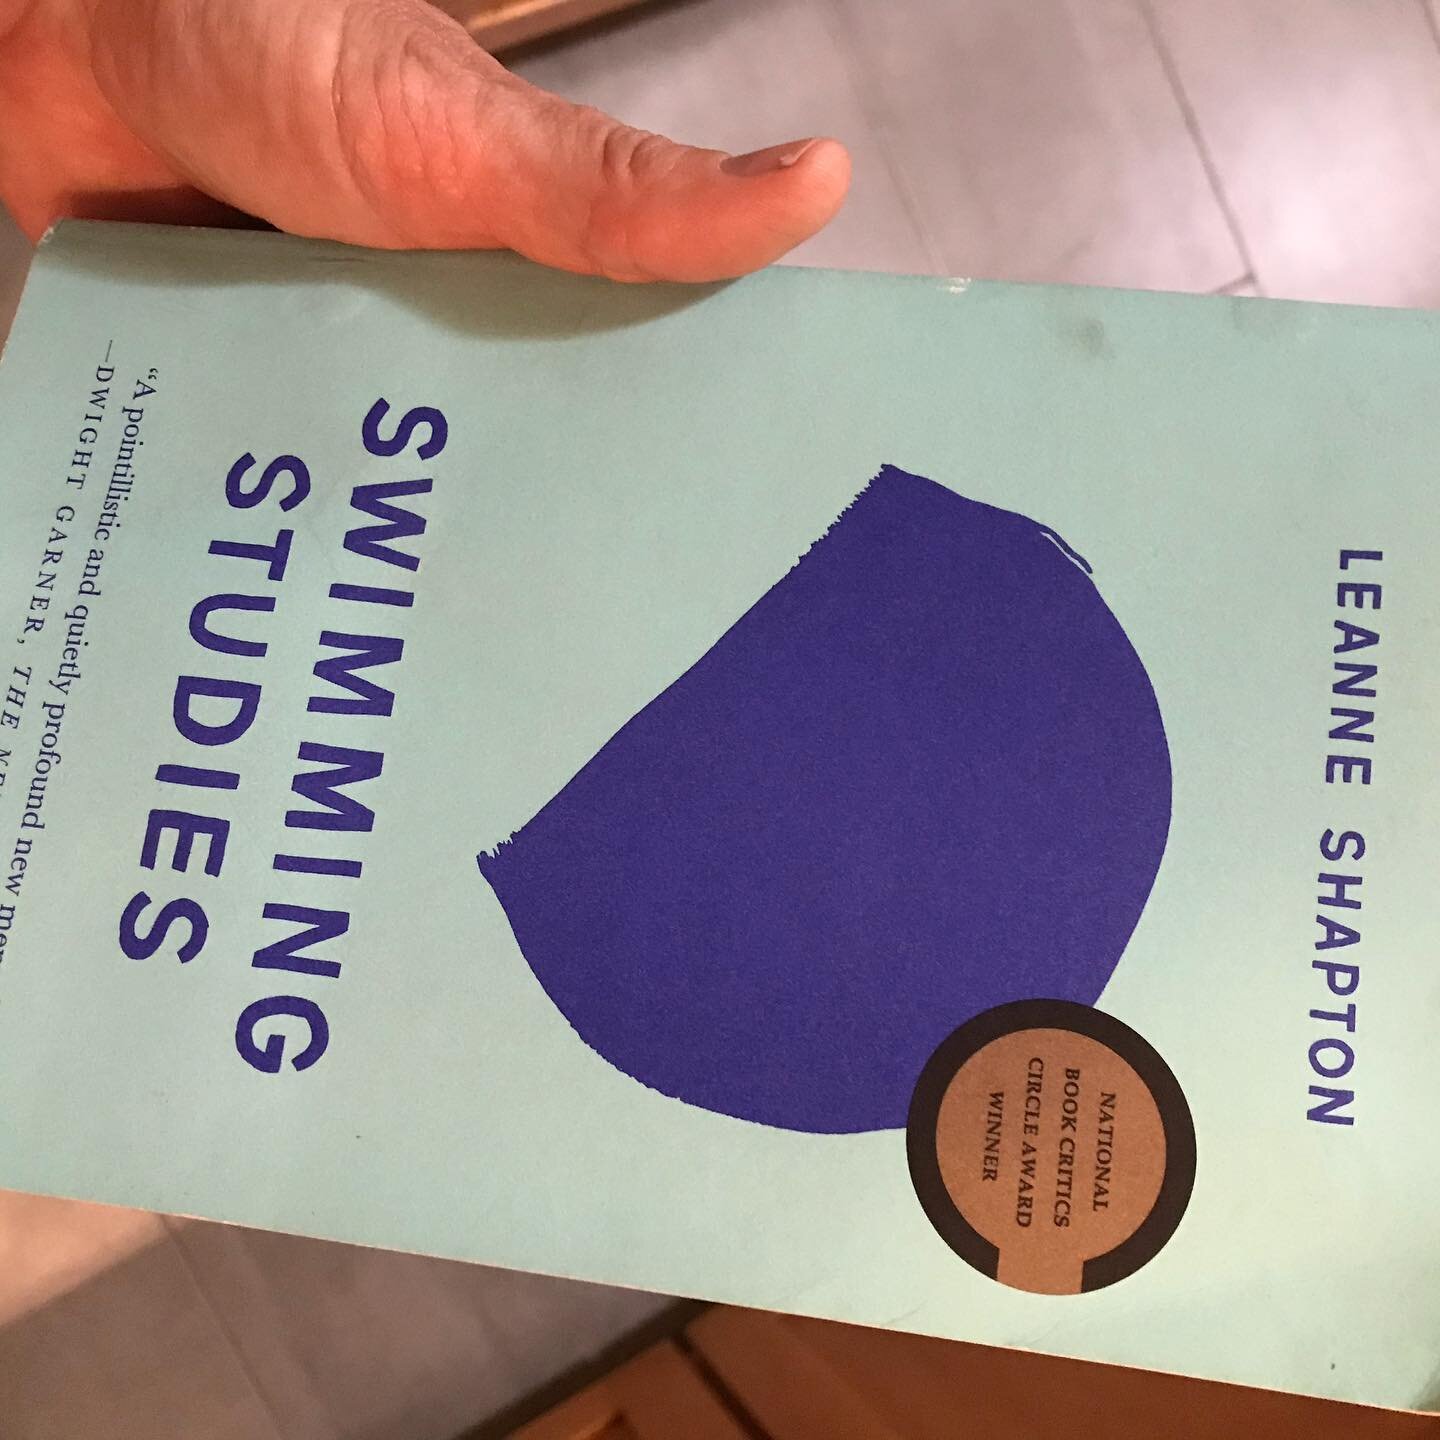 &ldquo;Artistic discipline and athletic discipline are kissing cousins, they require the same thing, an unspecial practice: tedious and pitch-black invisible, private as guts, but always sacred.&rdquo;

Really enjoying this book Swimming Studies, a m